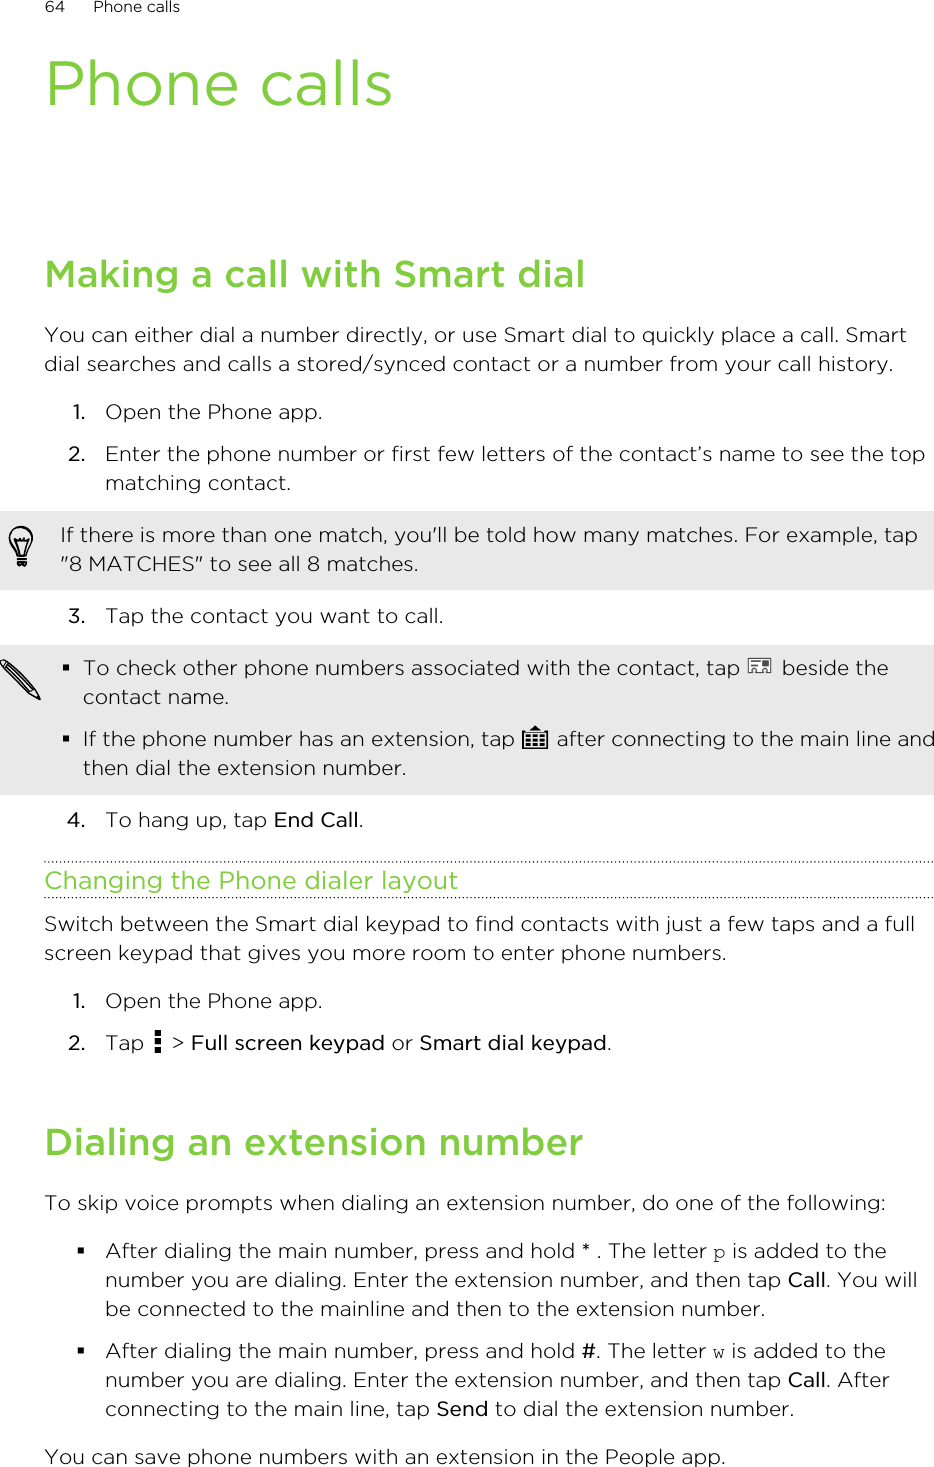 Phone callsMaking a call with Smart dialYou can either dial a number directly, or use Smart dial to quickly place a call. Smartdial searches and calls a stored/synced contact or a number from your call history.1. Open the Phone app.2. Enter the phone number or first few letters of the contact’s name to see the topmatching contact. If there is more than one match, you&apos;ll be told how many matches. For example, tap&quot;8 MATCHES&quot; to see all 8 matches.3. Tap the contact you want to call. §To check other phone numbers associated with the contact, tap   beside thecontact name.§If the phone number has an extension, tap   after connecting to the main line andthen dial the extension number.4. To hang up, tap End Call.Changing the Phone dialer layoutSwitch between the Smart dial keypad to find contacts with just a few taps and a fullscreen keypad that gives you more room to enter phone numbers.1. Open the Phone app.2. Tap   &gt; Full screen keypad or Smart dial keypad.Dialing an extension numberTo skip voice prompts when dialing an extension number, do one of the following:§After dialing the main number, press and hold * . The letter p is added to thenumber you are dialing. Enter the extension number, and then tap Call. You willbe connected to the mainline and then to the extension number.§After dialing the main number, press and hold #. The letter w is added to thenumber you are dialing. Enter the extension number, and then tap Call. Afterconnecting to the main line, tap Send to dial the extension number.You can save phone numbers with an extension in the People app.64 Phone callsHTC Confidential for Certification HTC Confidential for Certification